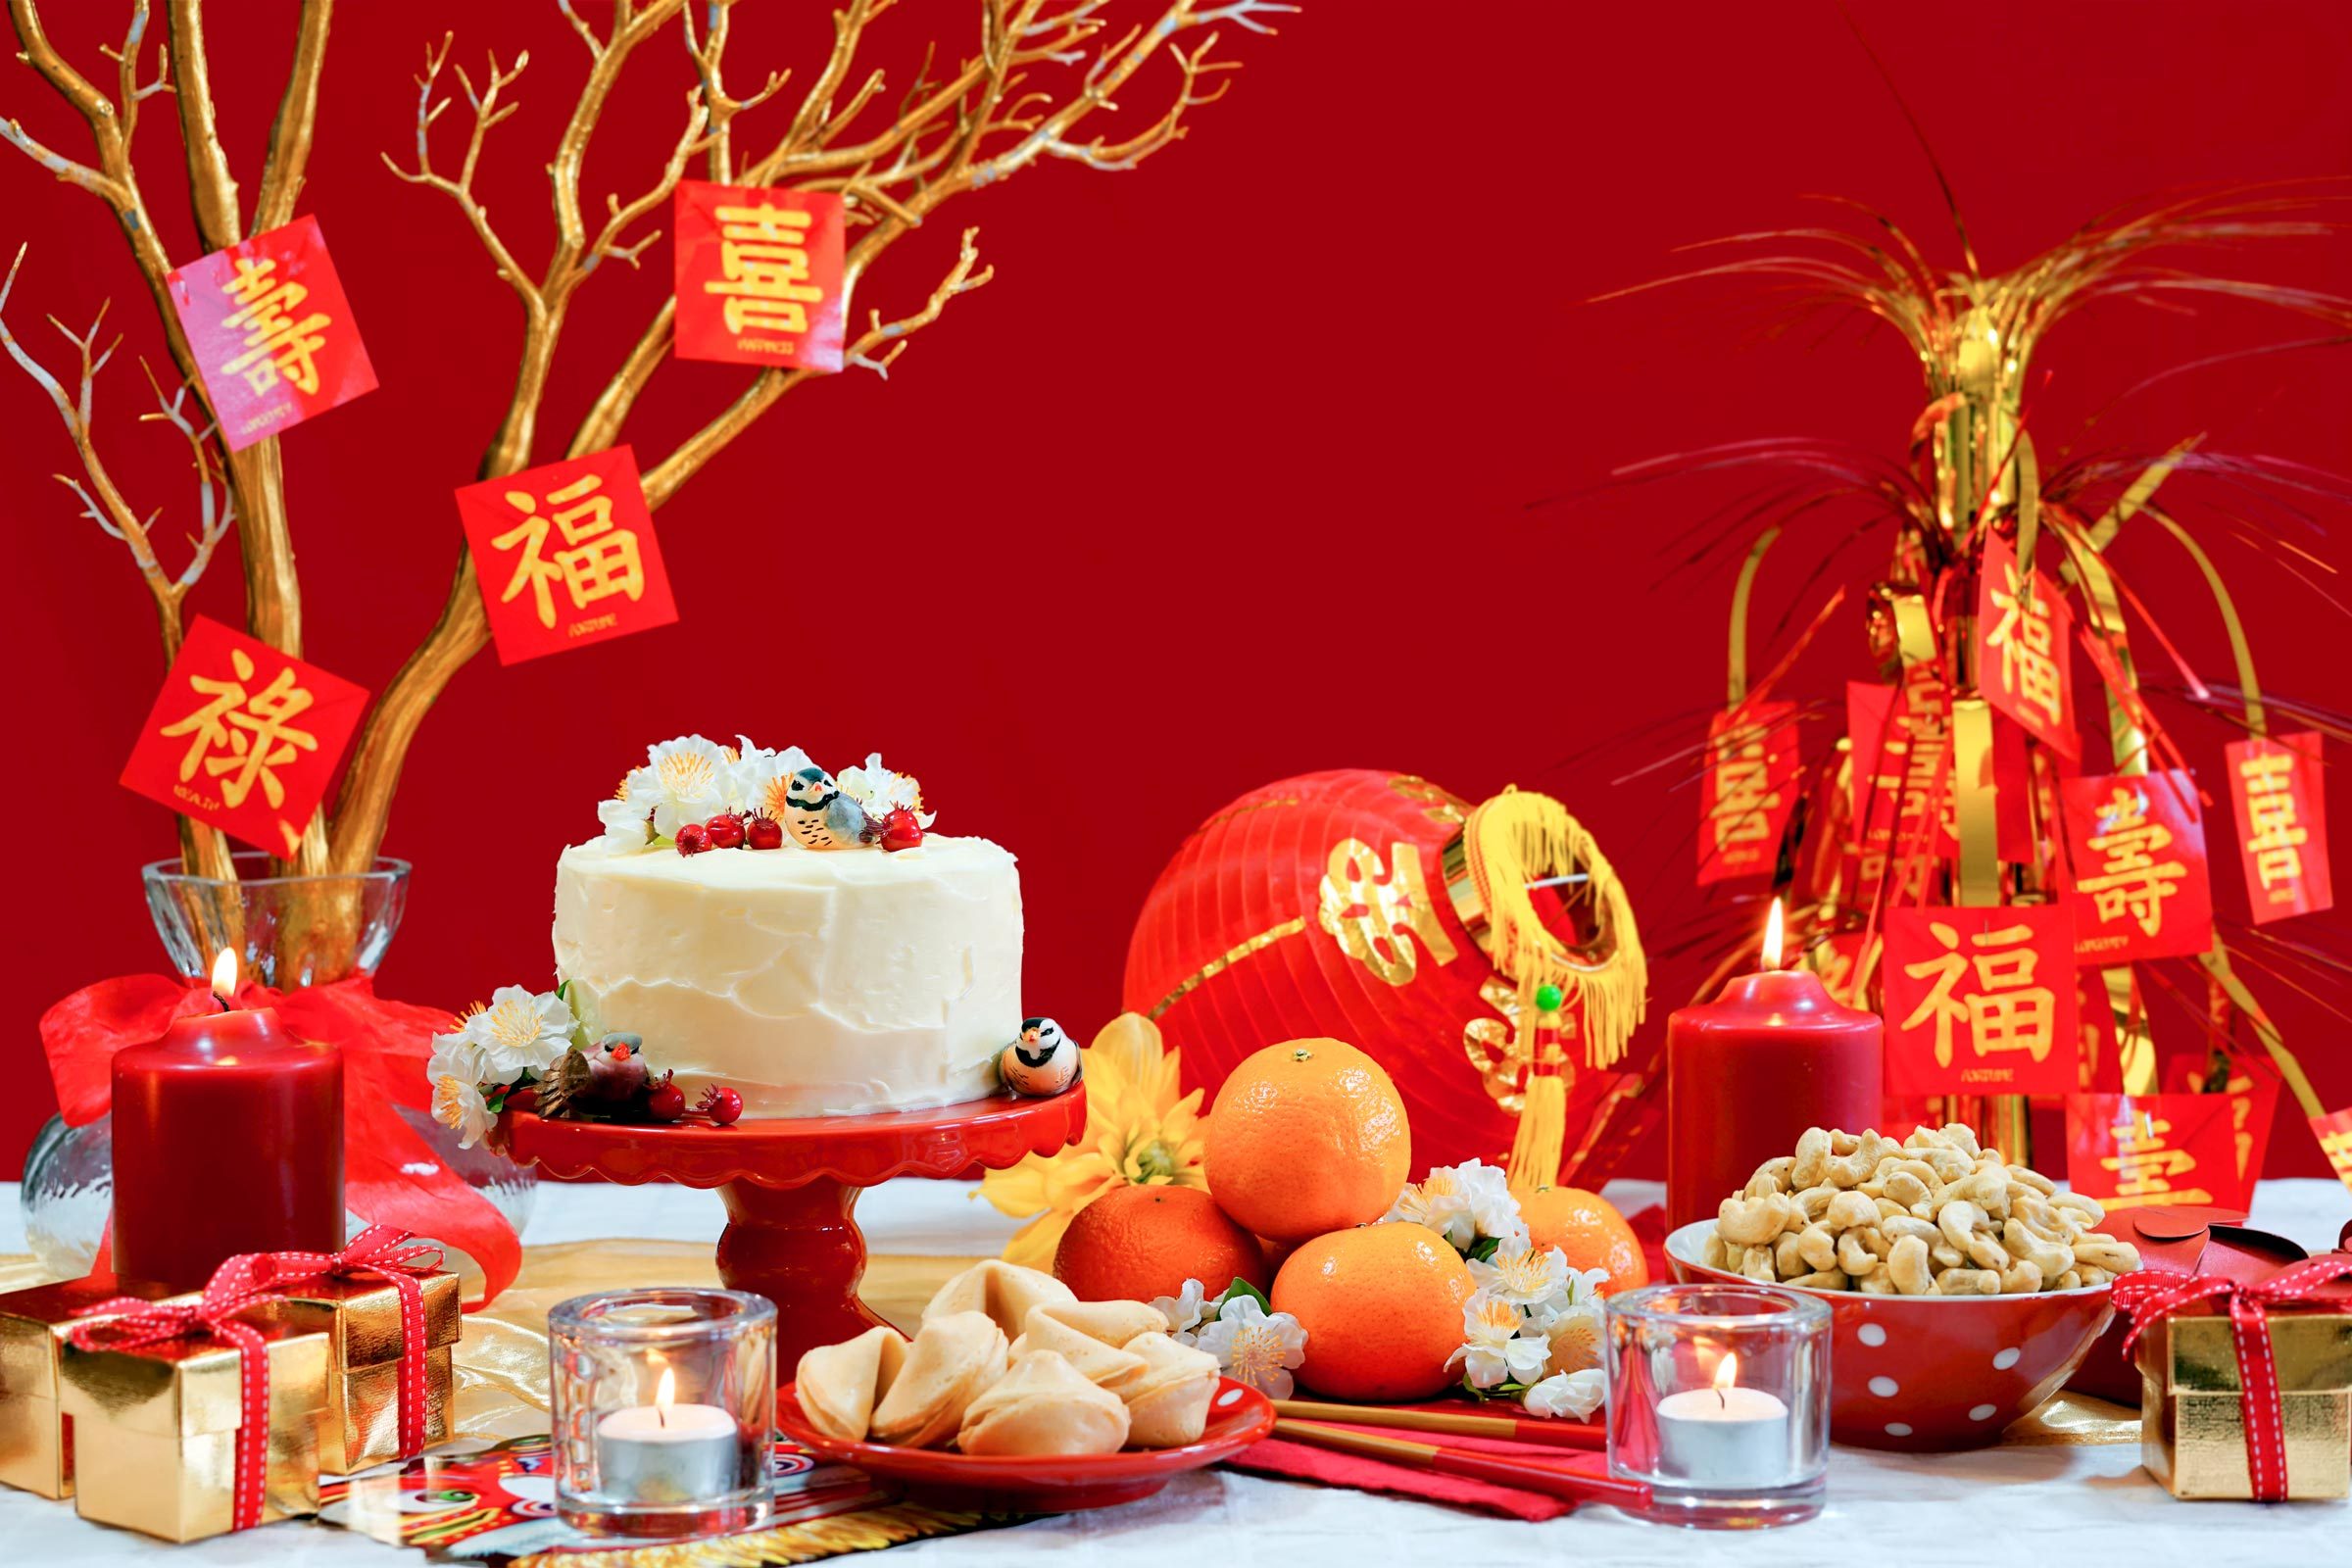 Here's How Brands Are Celebrating Chinese New Year With Traditional Red  Pockets